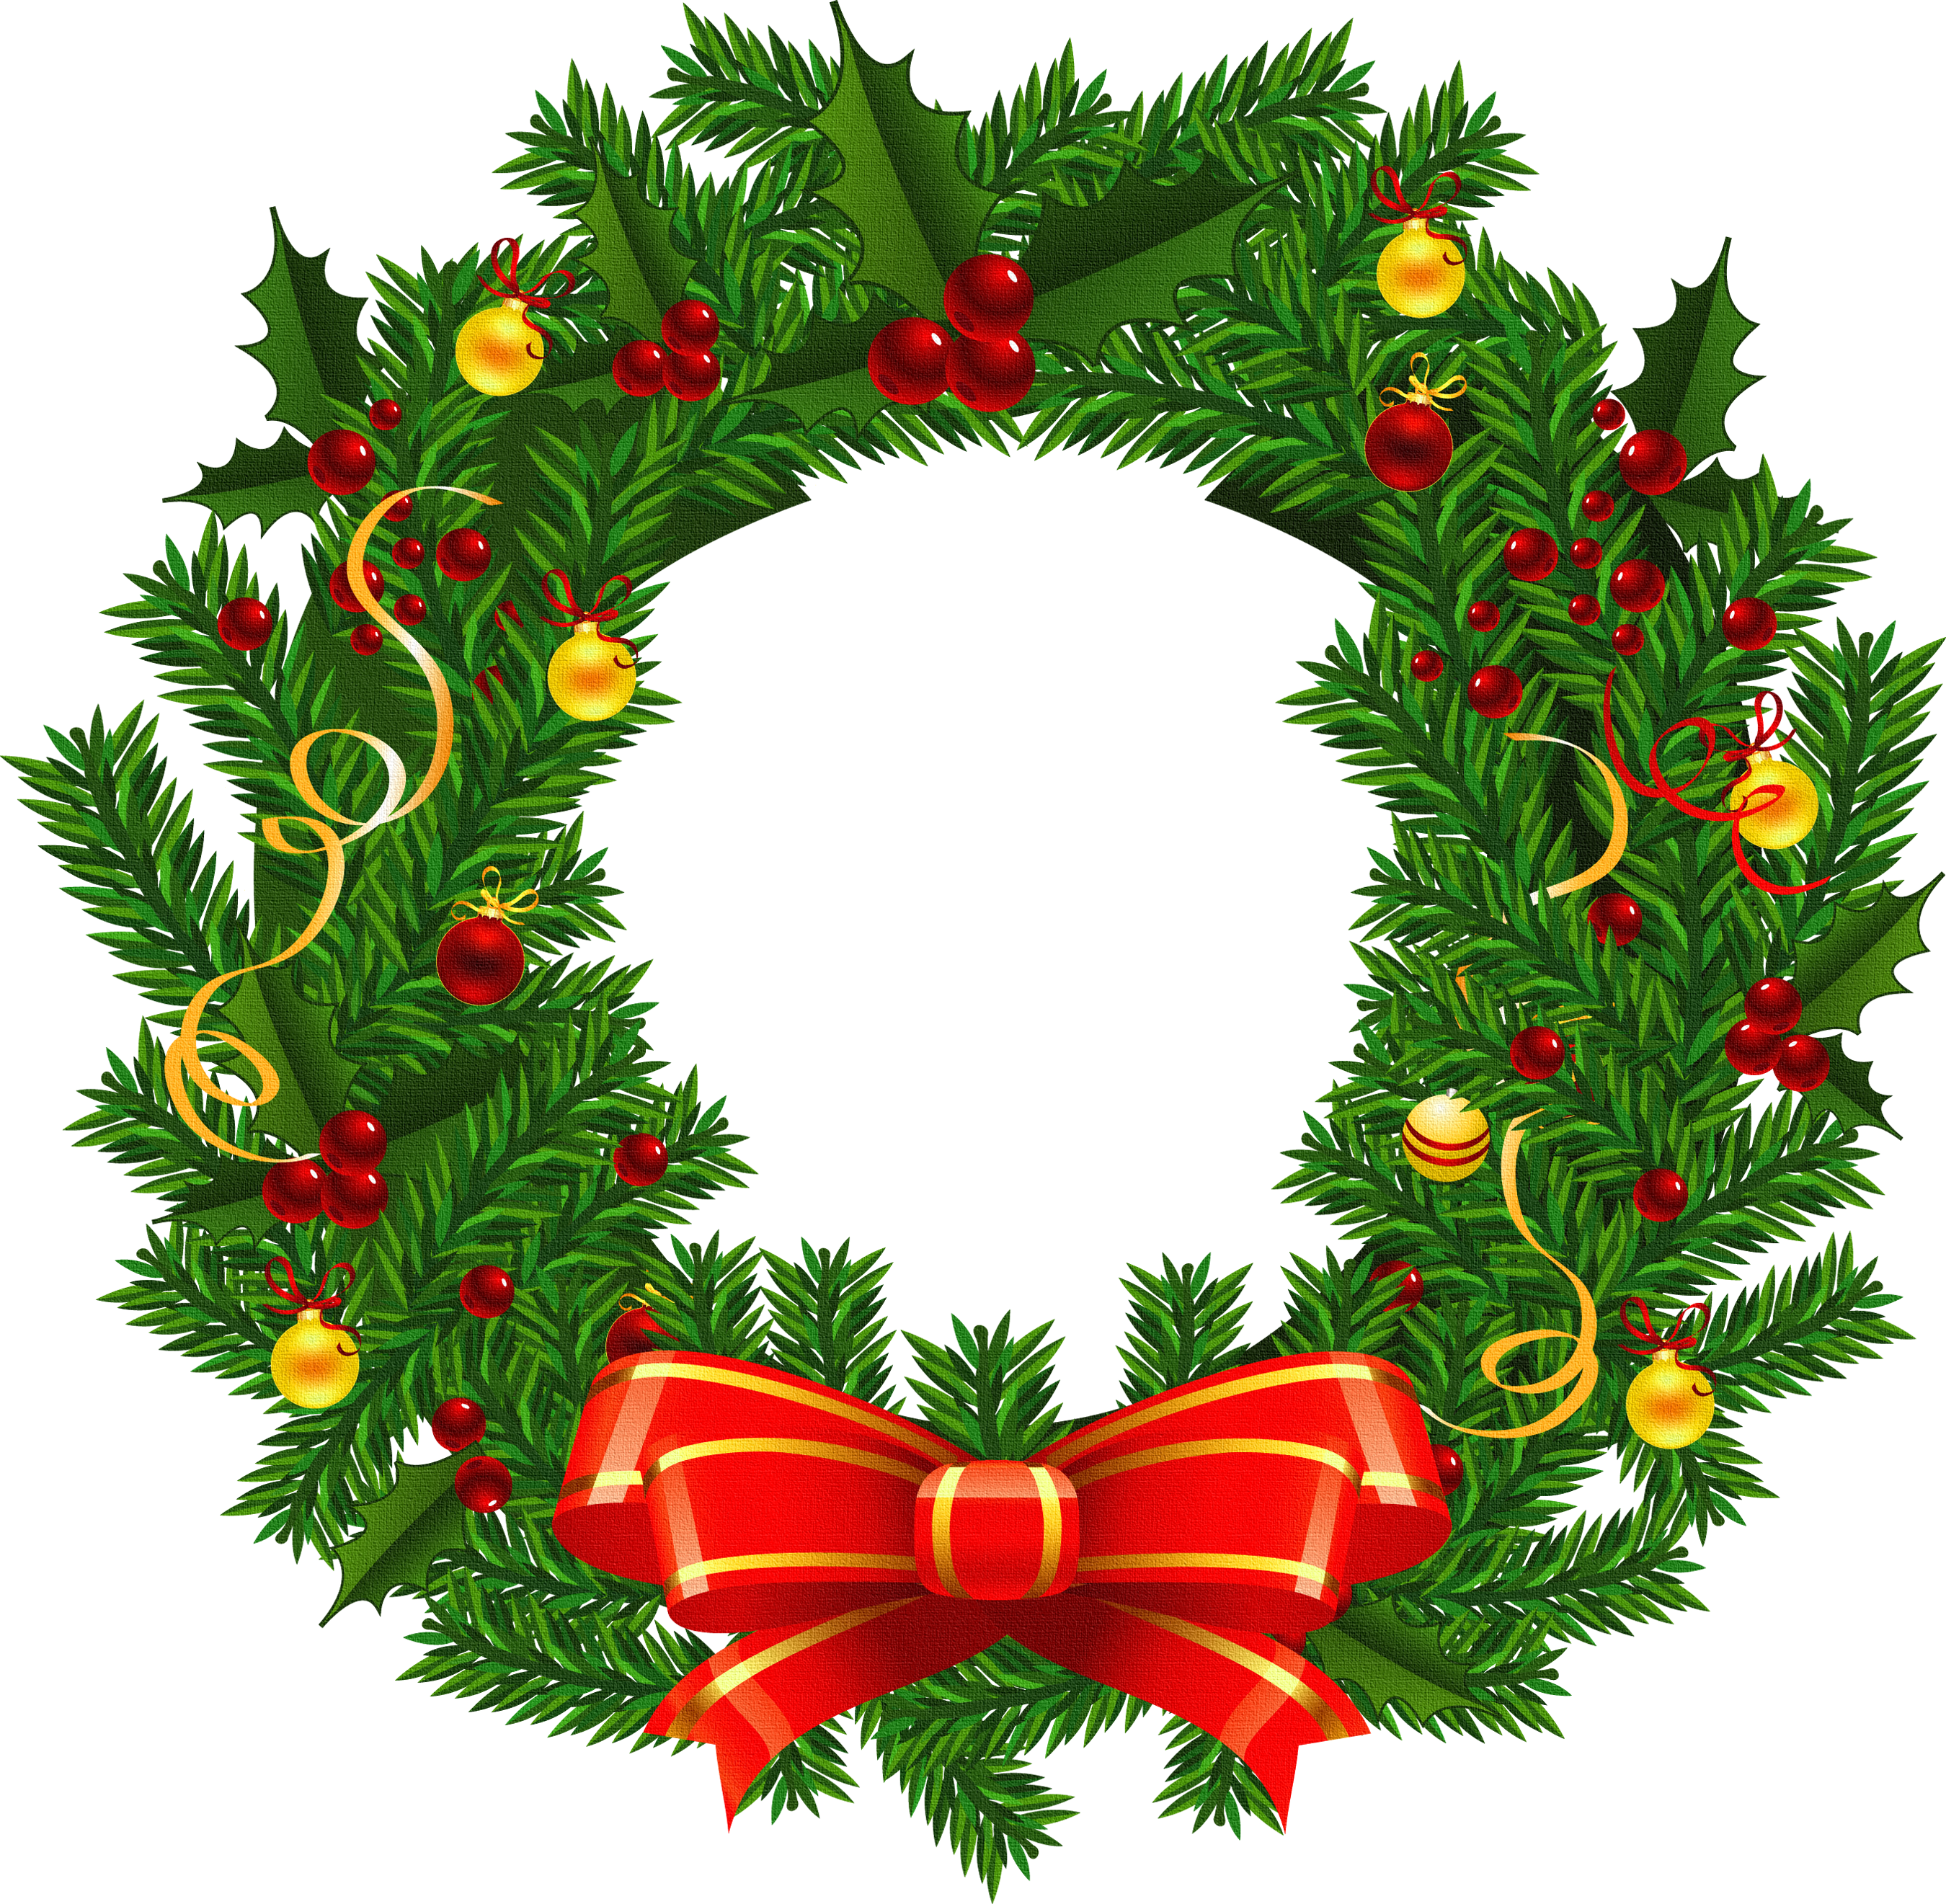 Christmas Wreath Clipart & Christmas Wreath Clip Art Images.